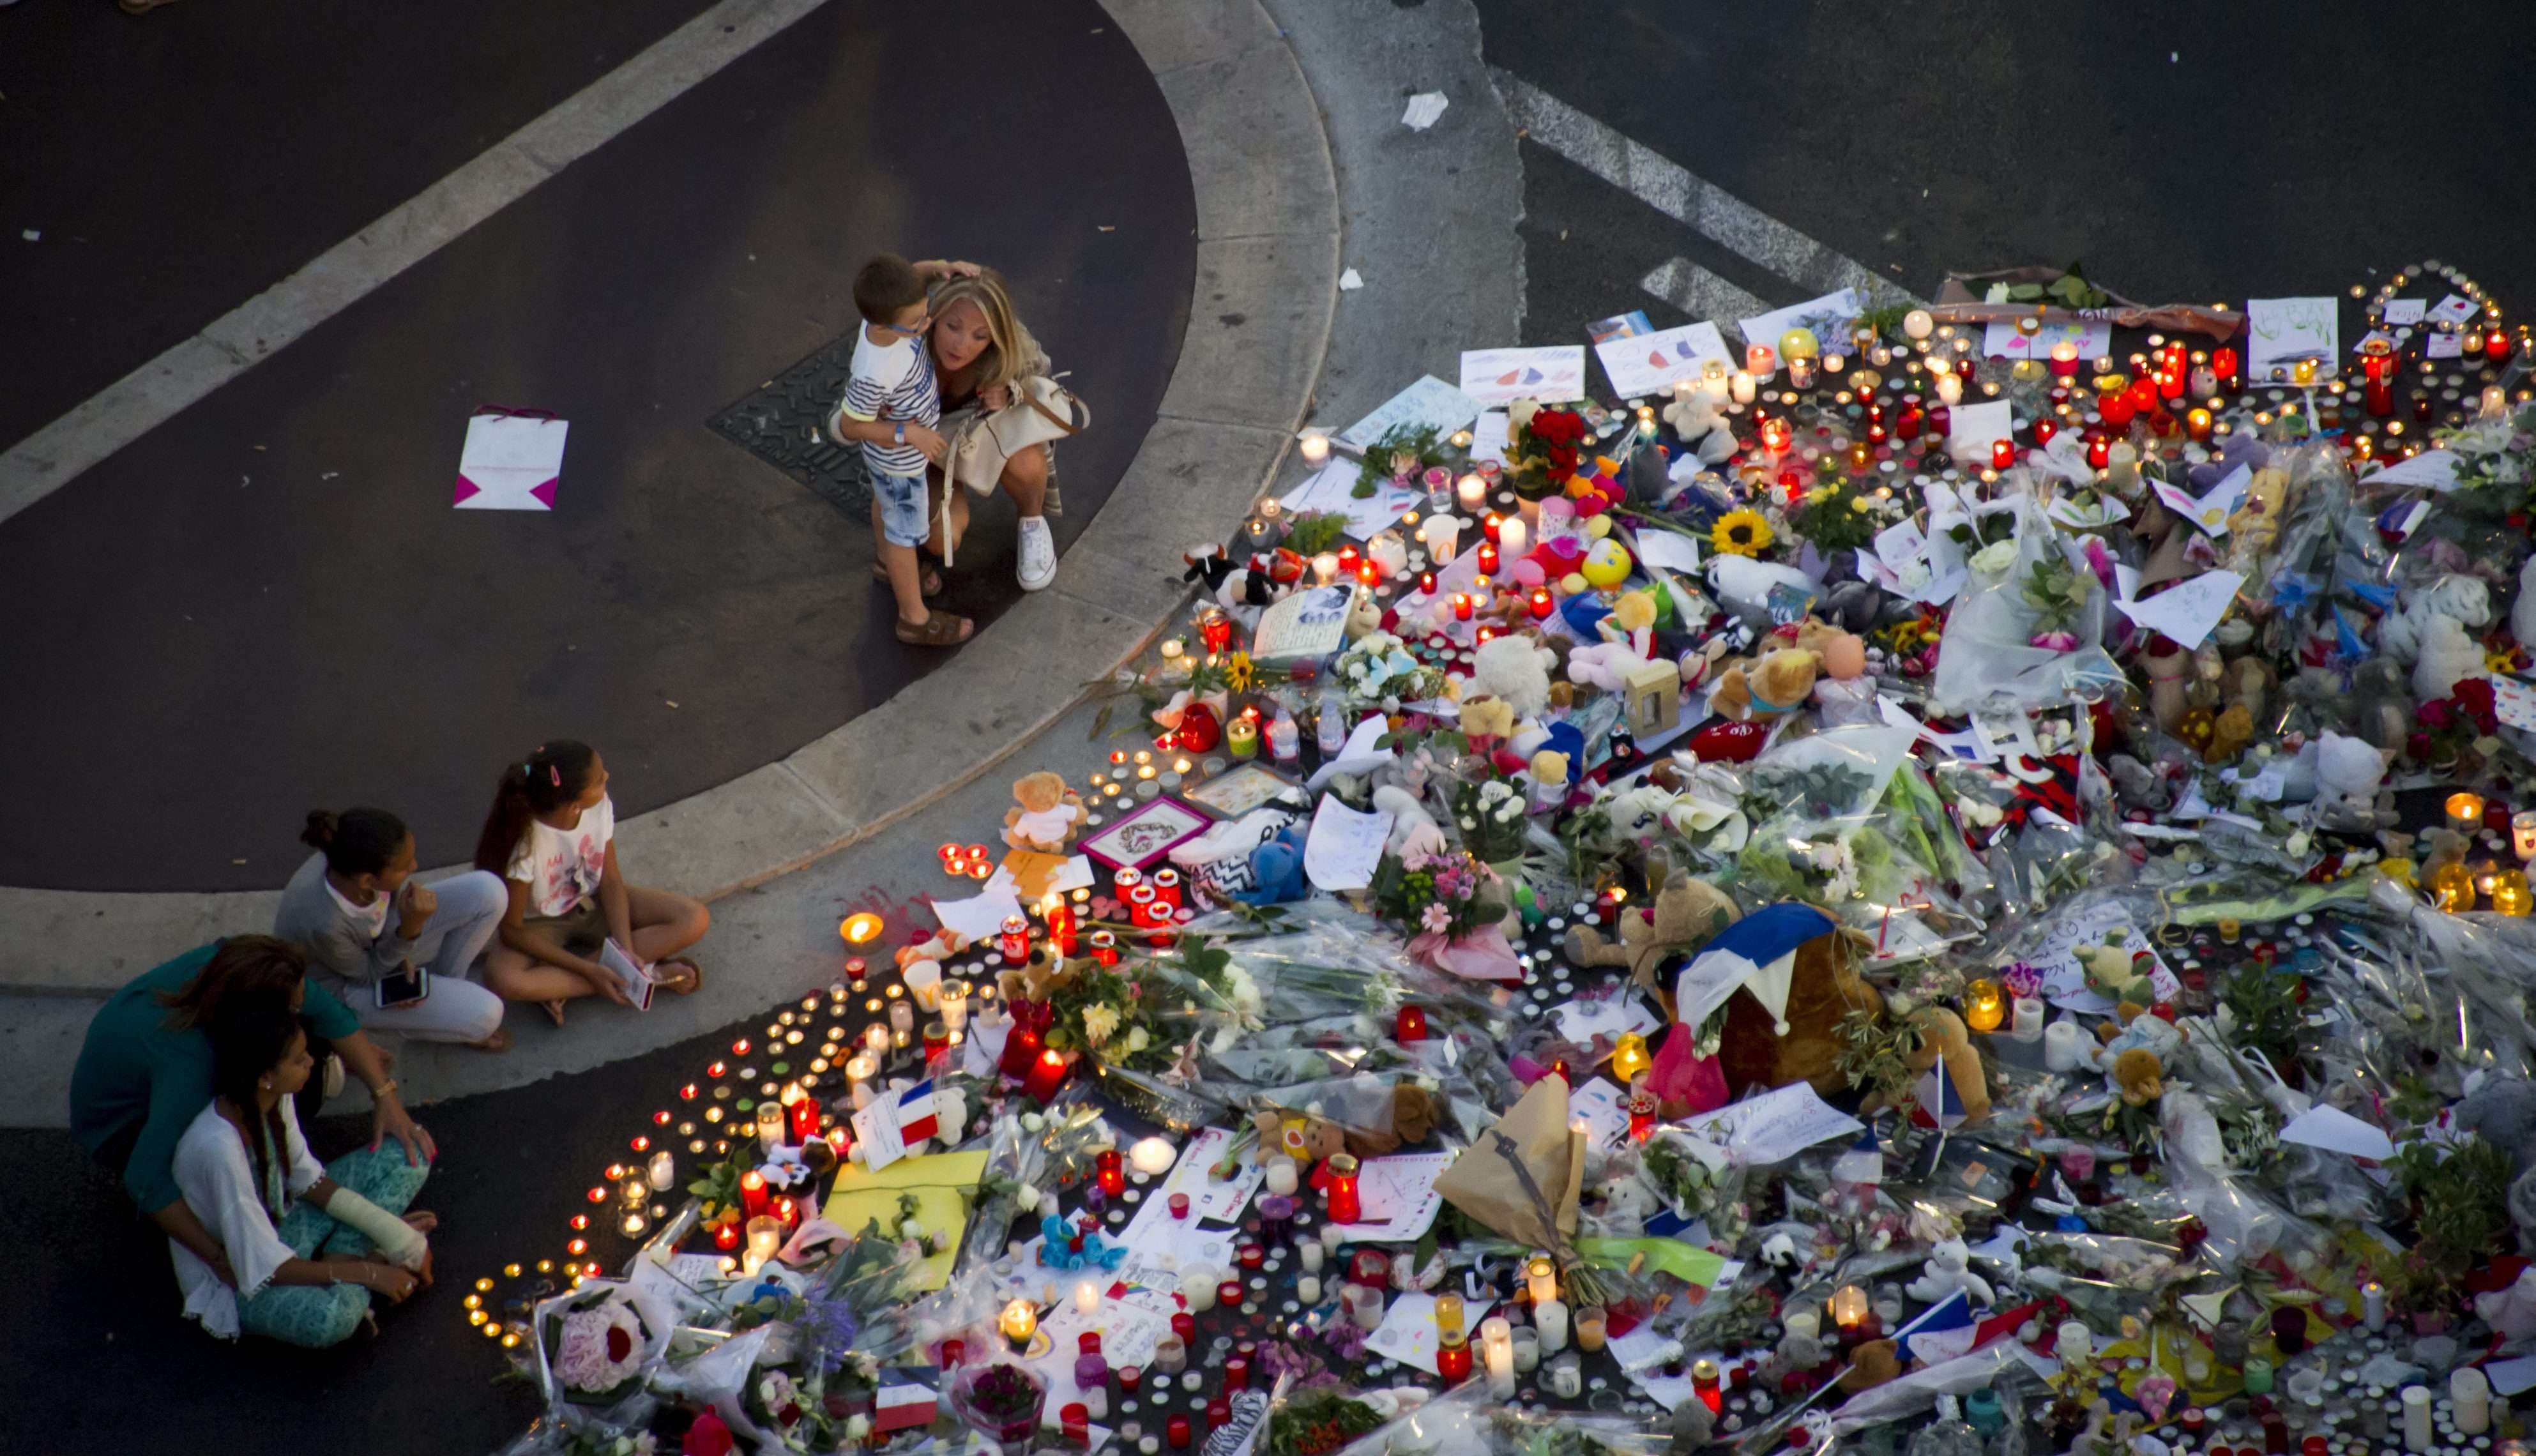 People gather at a makeshift memorial of flowers and candles on the 'Promenade des Anglais', scene of the Bastille Day truck attack tat killed 84 people. Photo: EPA